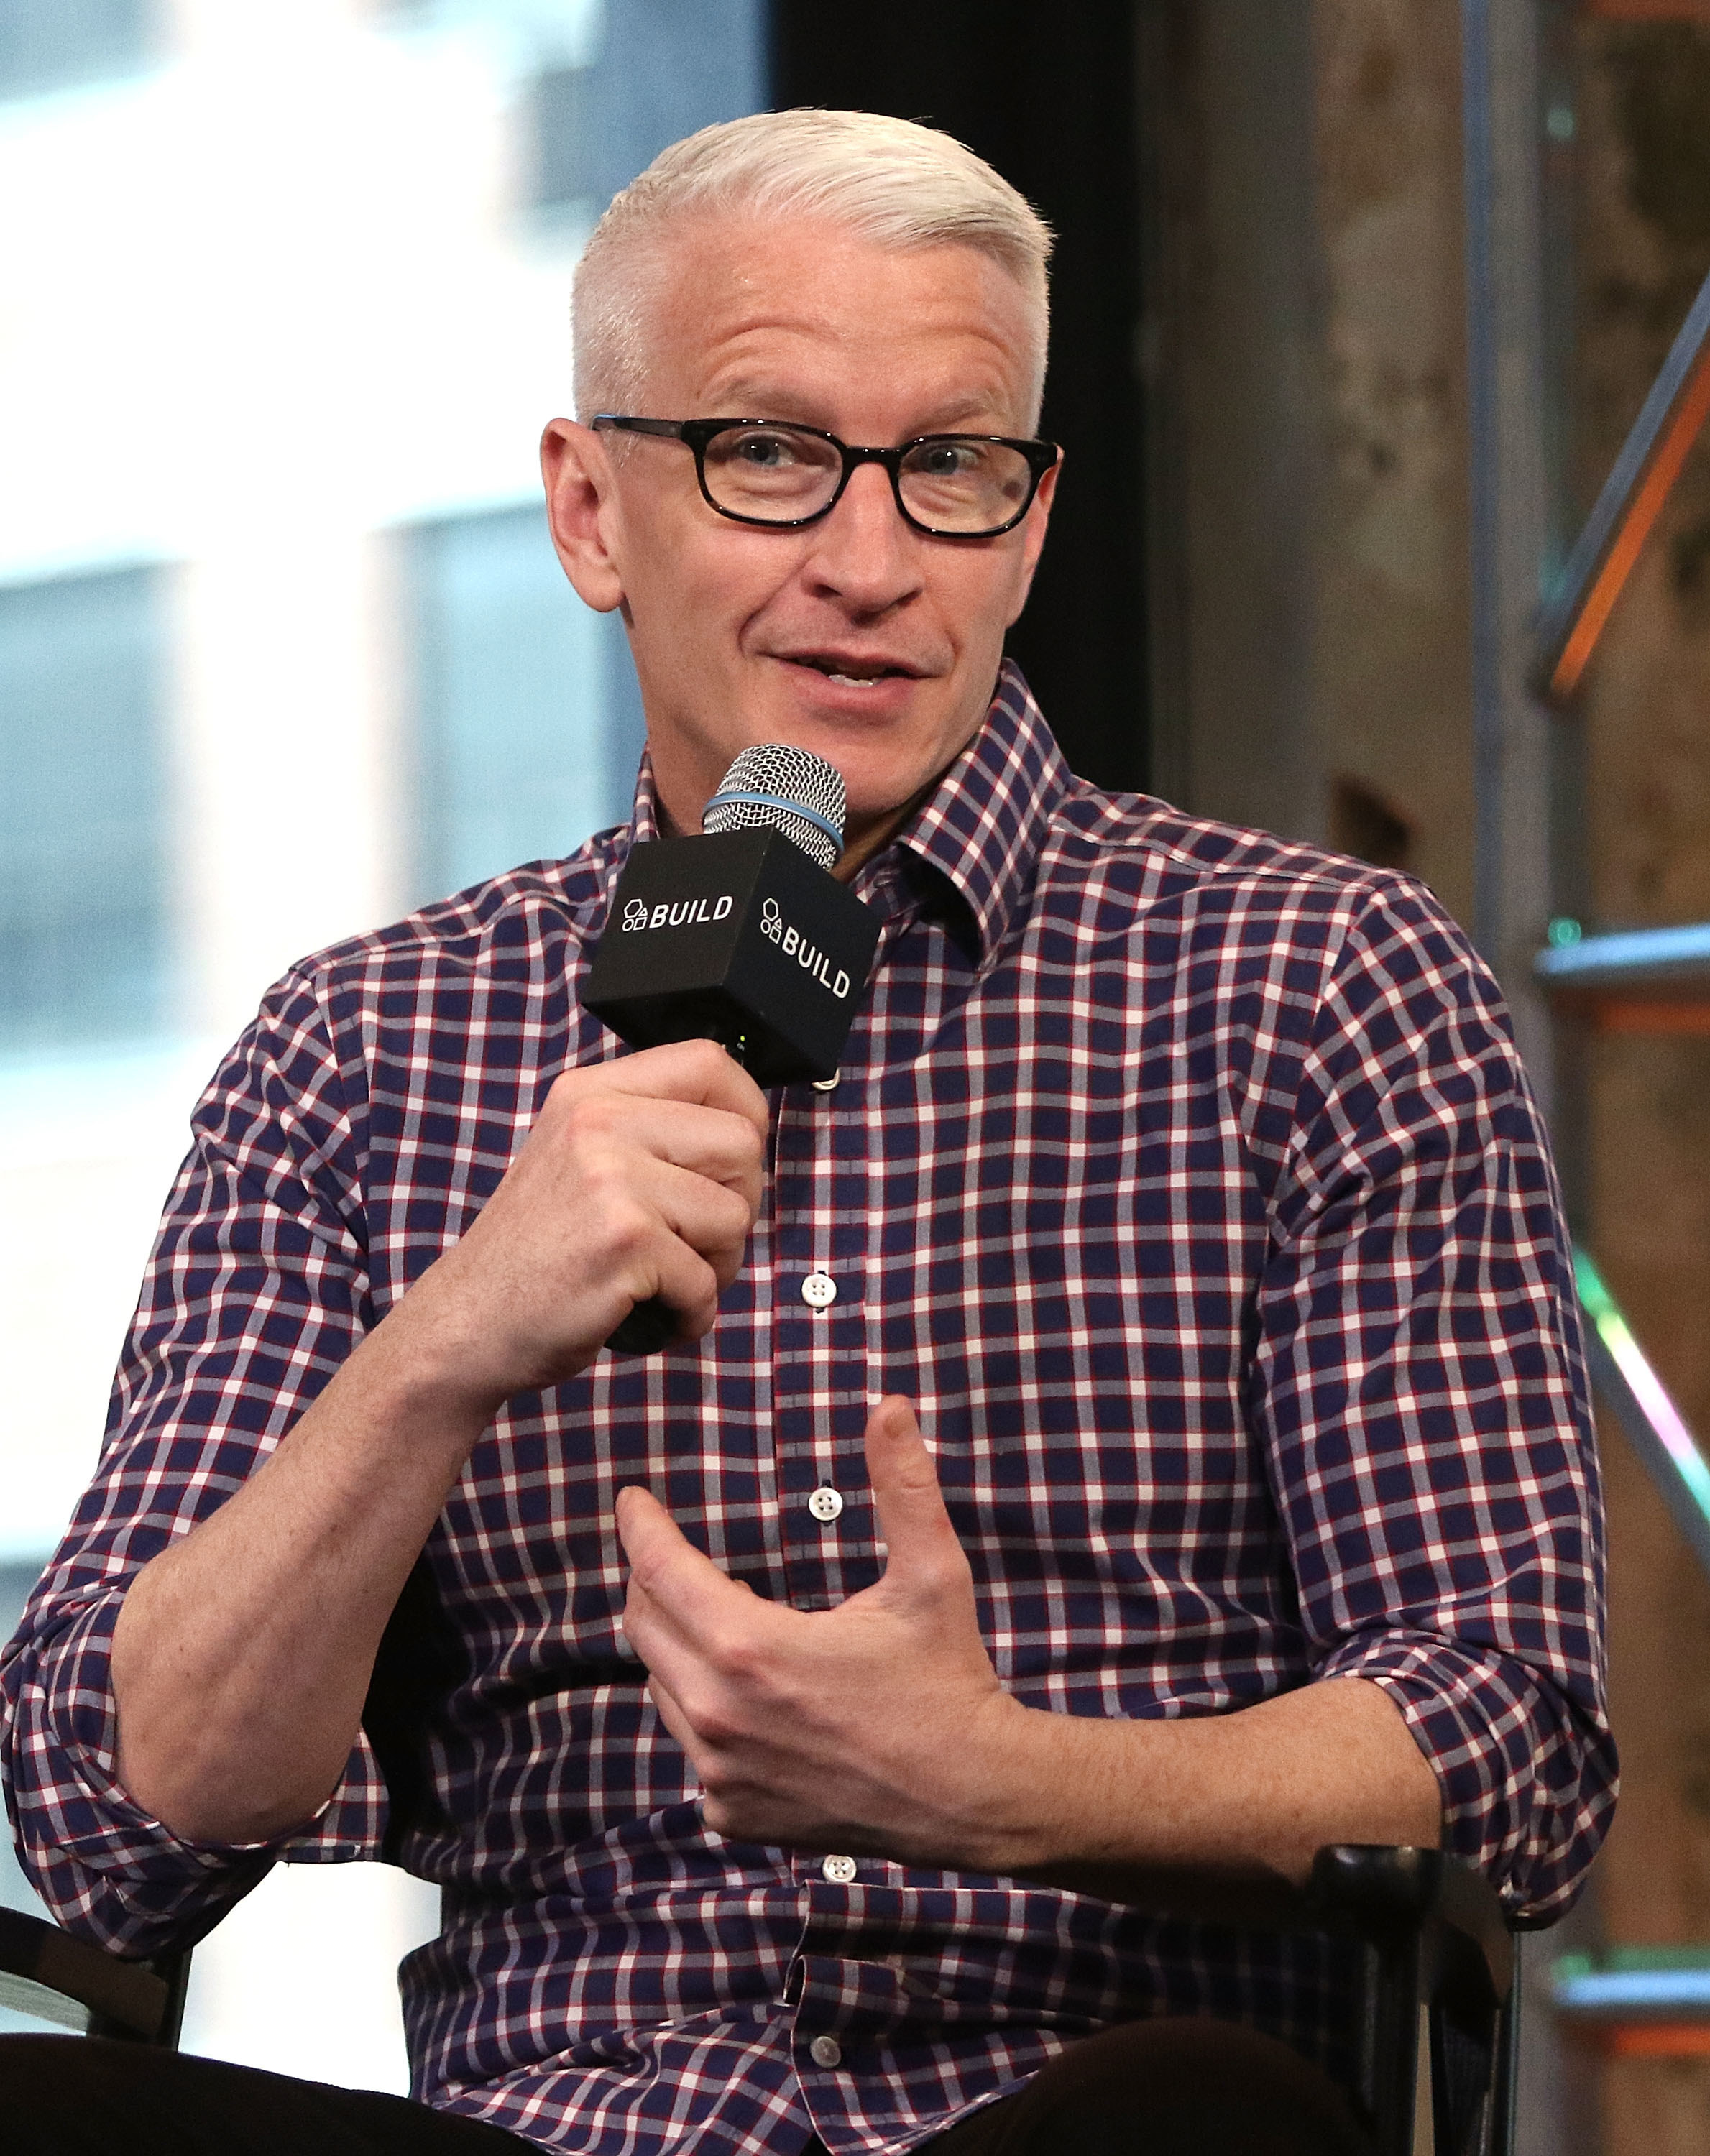 Anderson Cooper speaking into a microphone